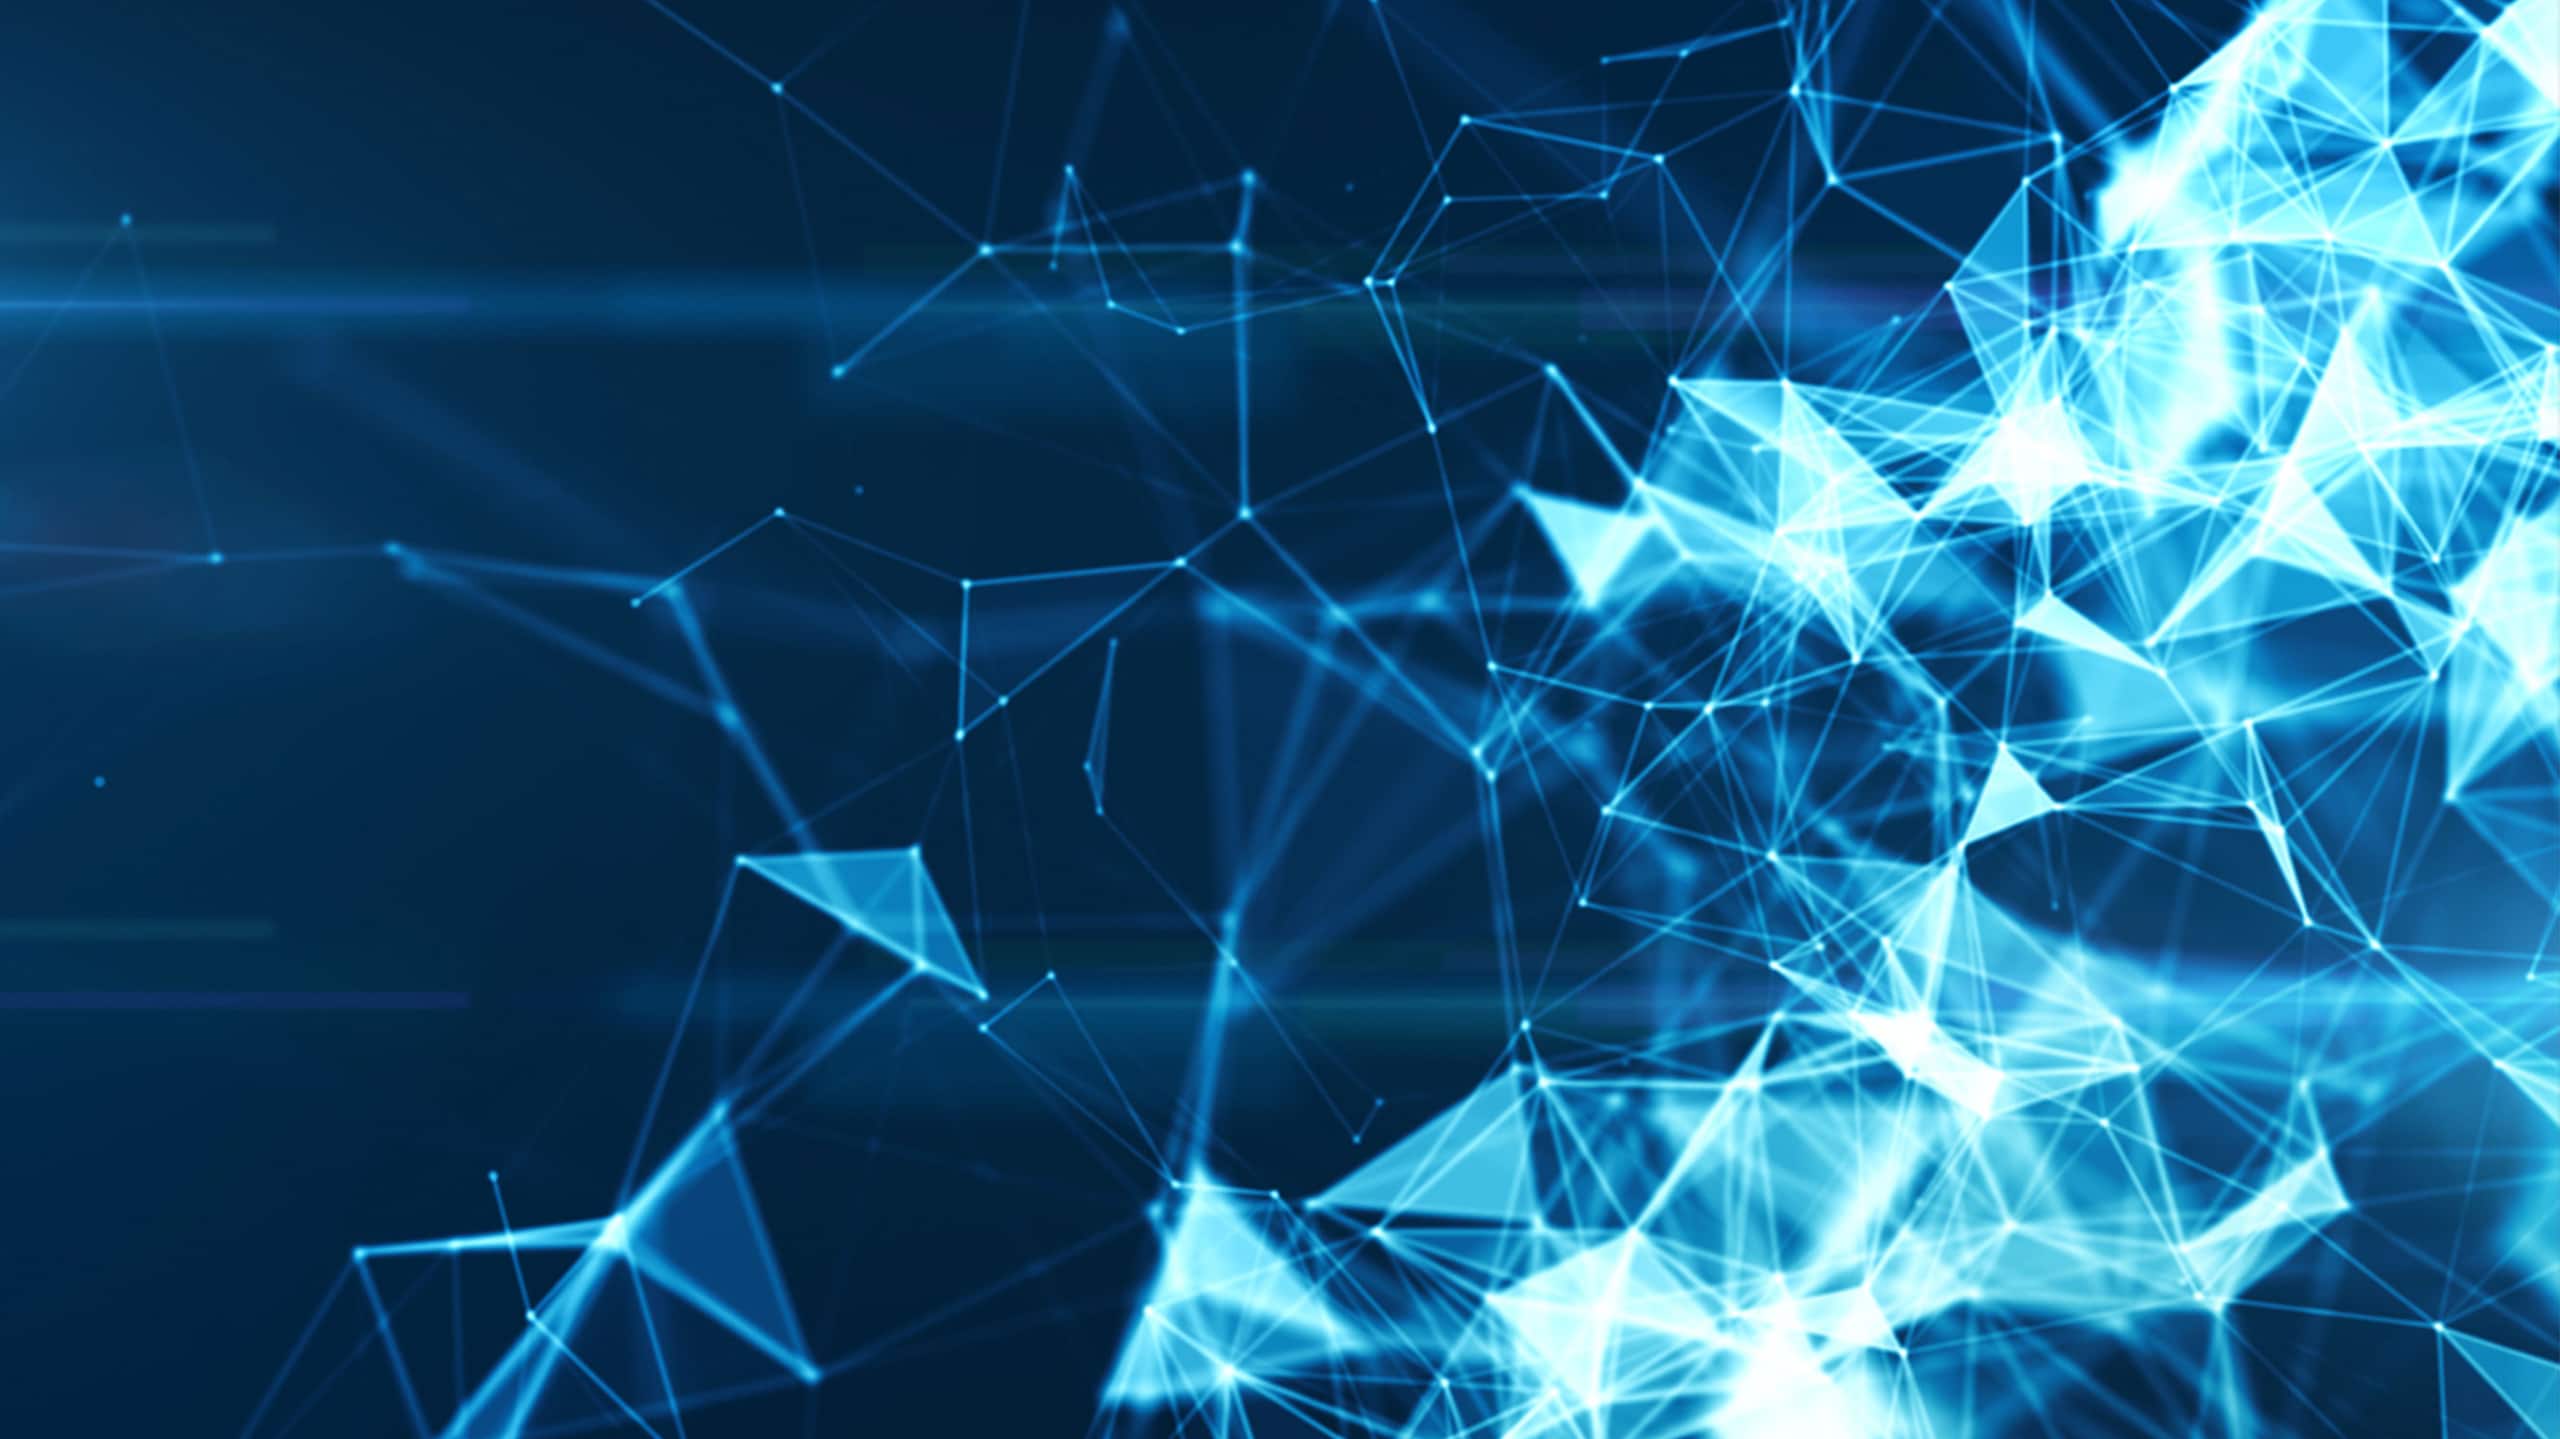 Abstract digital background depicting a network of connected lines and bright blue glowing nodes, symbolizing concepts like technology, connectivity, and data networks, essential for enhancing vulnerability management.